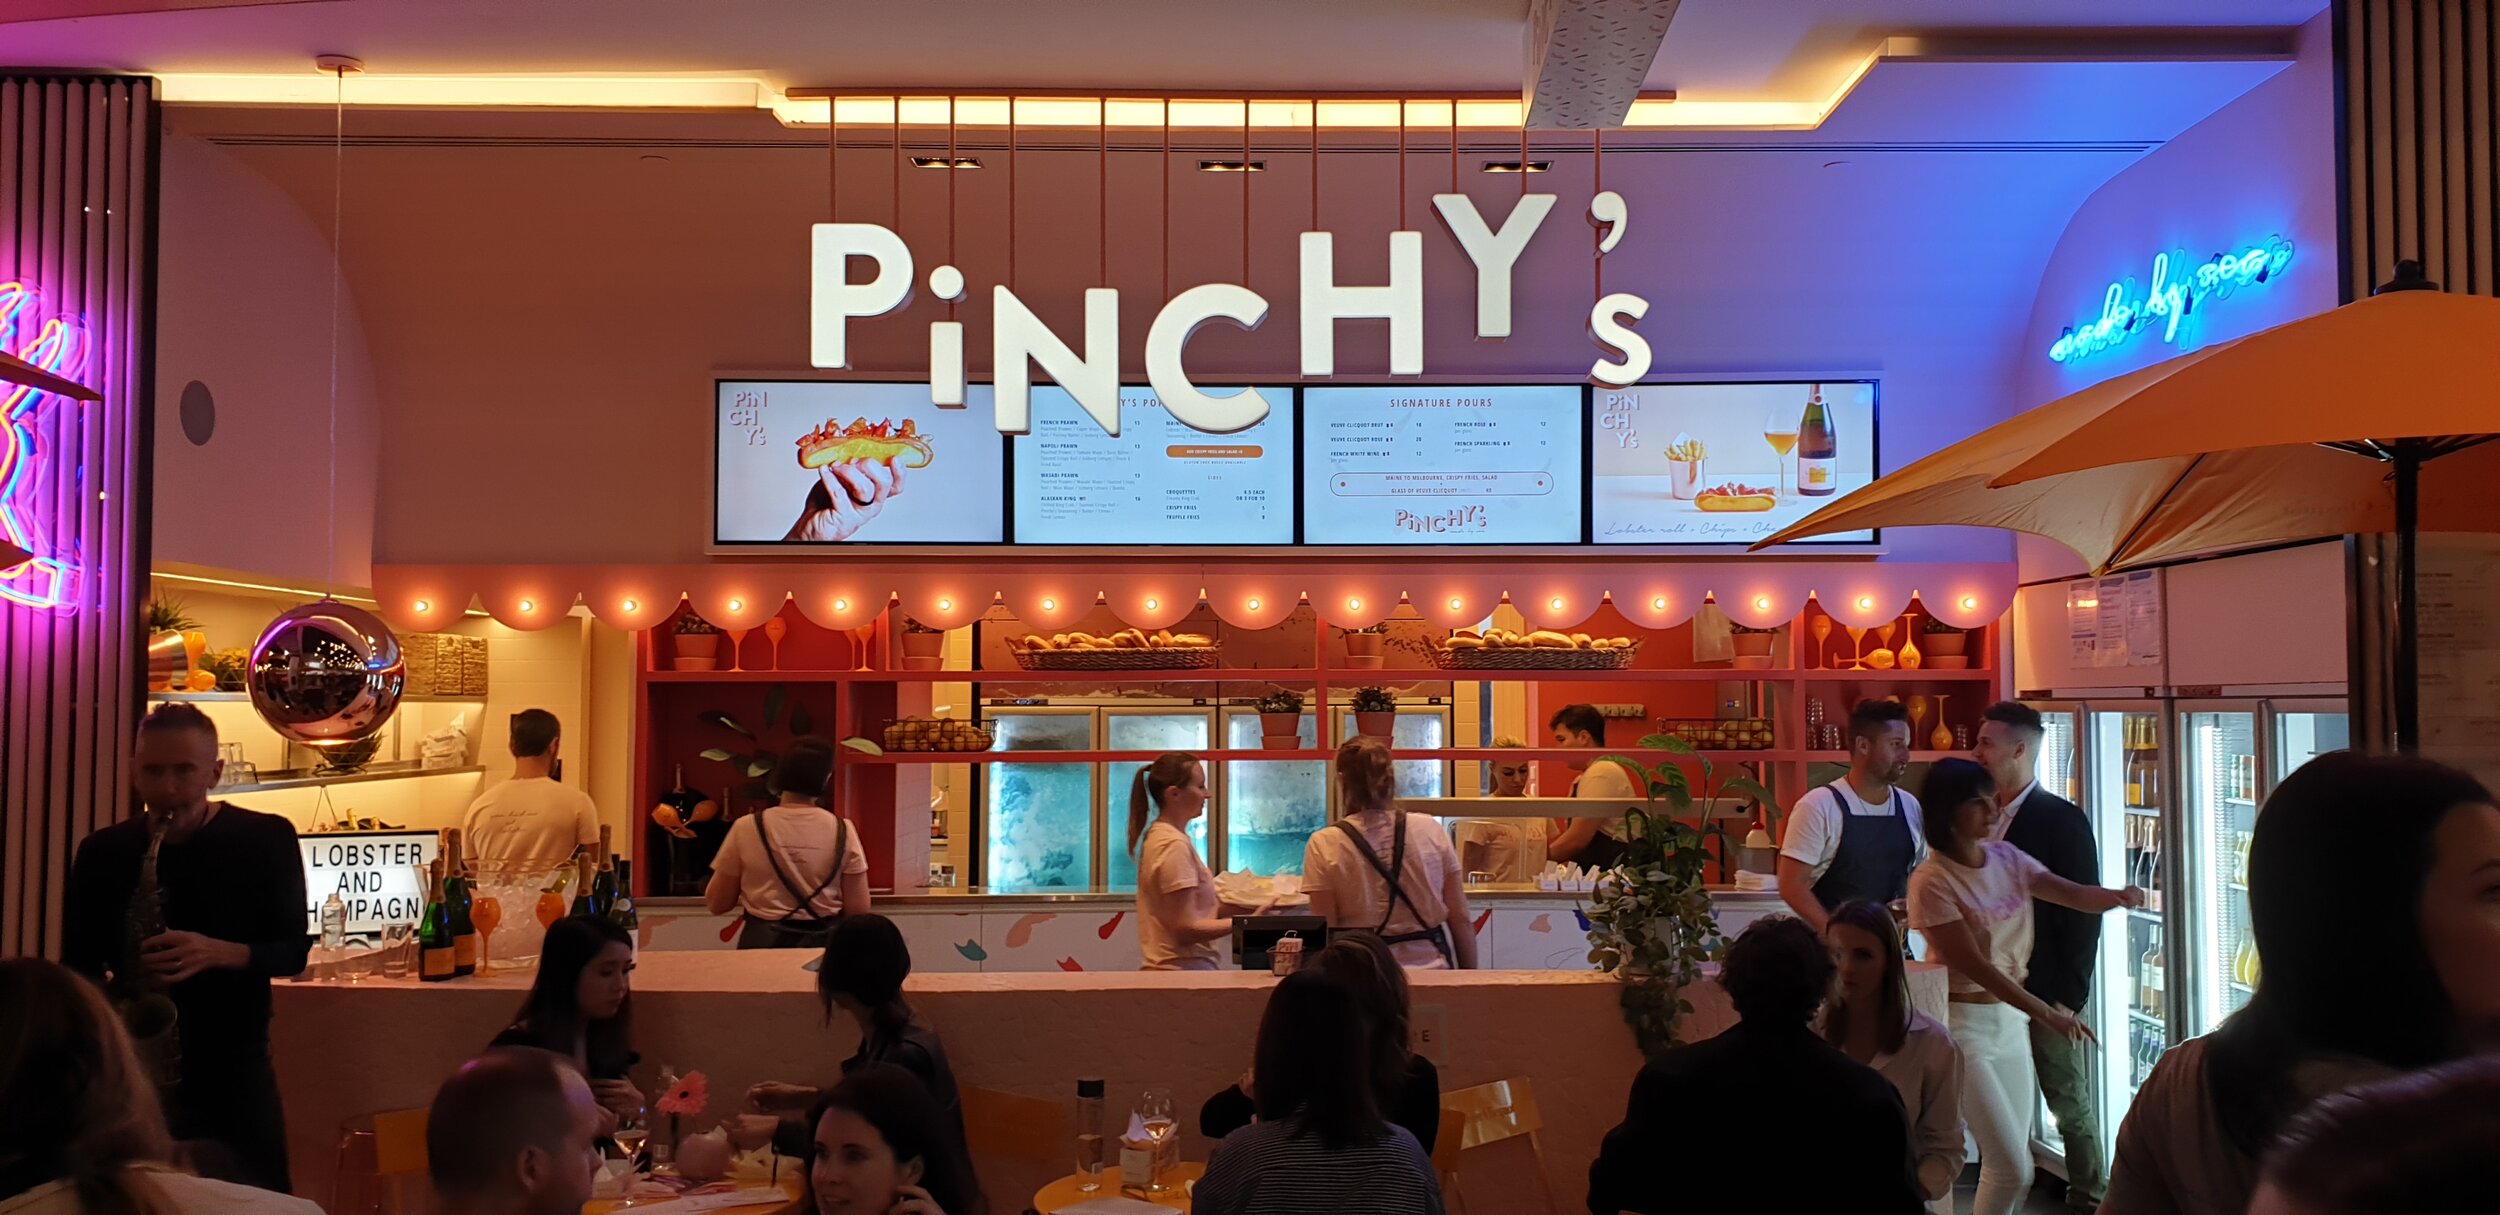 PINCHY'S - MADE BY SEA(海产)